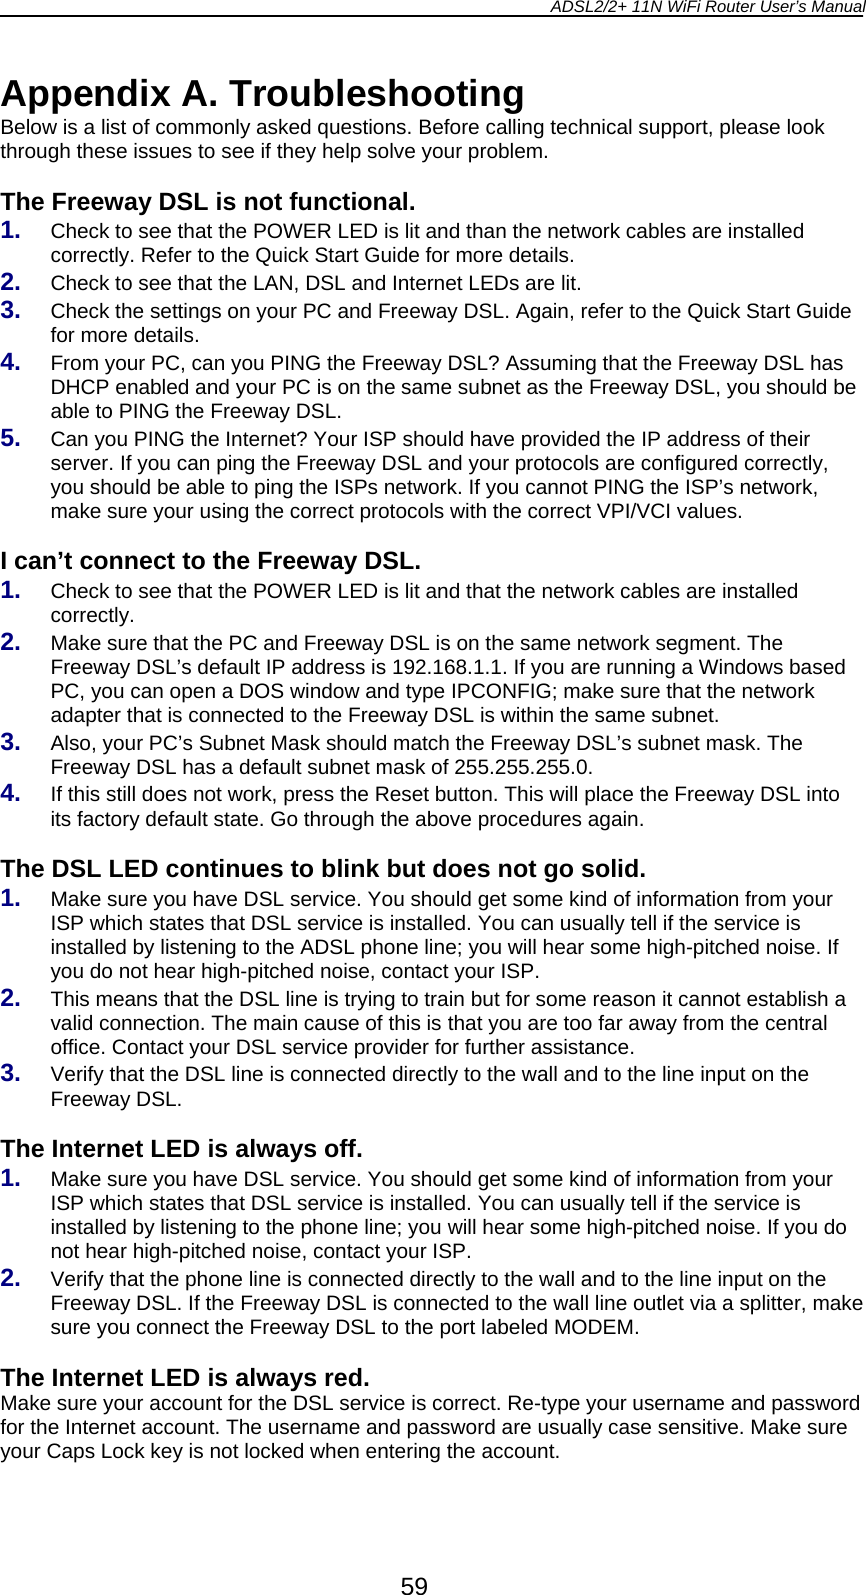 ADSL2/2+ 11N WiFi Router User’s Manual  59 Appendix A. Troubleshooting Below is a list of commonly asked questions. Before calling technical support, please look through these issues to see if they help solve your problem.  The Freeway DSL is not functional. 1.  Check to see that the POWER LED is lit and than the network cables are installed correctly. Refer to the Quick Start Guide for more details. 2.  Check to see that the LAN, DSL and Internet LEDs are lit. 3.  Check the settings on your PC and Freeway DSL. Again, refer to the Quick Start Guide for more details. 4.  From your PC, can you PING the Freeway DSL? Assuming that the Freeway DSL has DHCP enabled and your PC is on the same subnet as the Freeway DSL, you should be able to PING the Freeway DSL. 5.  Can you PING the Internet? Your ISP should have provided the IP address of their server. If you can ping the Freeway DSL and your protocols are configured correctly, you should be able to ping the ISPs network. If you cannot PING the ISP’s network, make sure your using the correct protocols with the correct VPI/VCI values.  I can’t connect to the Freeway DSL. 1.  Check to see that the POWER LED is lit and that the network cables are installed correctly. 2.  Make sure that the PC and Freeway DSL is on the same network segment. The Freeway DSL’s default IP address is 192.168.1.1. If you are running a Windows based PC, you can open a DOS window and type IPCONFIG; make sure that the network adapter that is connected to the Freeway DSL is within the same subnet. 3.  Also, your PC’s Subnet Mask should match the Freeway DSL’s subnet mask. The Freeway DSL has a default subnet mask of 255.255.255.0. 4.  If this still does not work, press the Reset button. This will place the Freeway DSL into its factory default state. Go through the above procedures again.  The DSL LED continues to blink but does not go solid. 1.  Make sure you have DSL service. You should get some kind of information from your ISP which states that DSL service is installed. You can usually tell if the service is installed by listening to the ADSL phone line; you will hear some high-pitched noise. If you do not hear high-pitched noise, contact your ISP. 2.  This means that the DSL line is trying to train but for some reason it cannot establish a valid connection. The main cause of this is that you are too far away from the central office. Contact your DSL service provider for further assistance. 3.  Verify that the DSL line is connected directly to the wall and to the line input on the Freeway DSL.  The Internet LED is always off. 1.  Make sure you have DSL service. You should get some kind of information from your ISP which states that DSL service is installed. You can usually tell if the service is installed by listening to the phone line; you will hear some high-pitched noise. If you do not hear high-pitched noise, contact your ISP. 2.  Verify that the phone line is connected directly to the wall and to the line input on the Freeway DSL. If the Freeway DSL is connected to the wall line outlet via a splitter, make sure you connect the Freeway DSL to the port labeled MODEM.  The Internet LED is always red. Make sure your account for the DSL service is correct. Re-type your username and password for the Internet account. The username and password are usually case sensitive. Make sure your Caps Lock key is not locked when entering the account.  